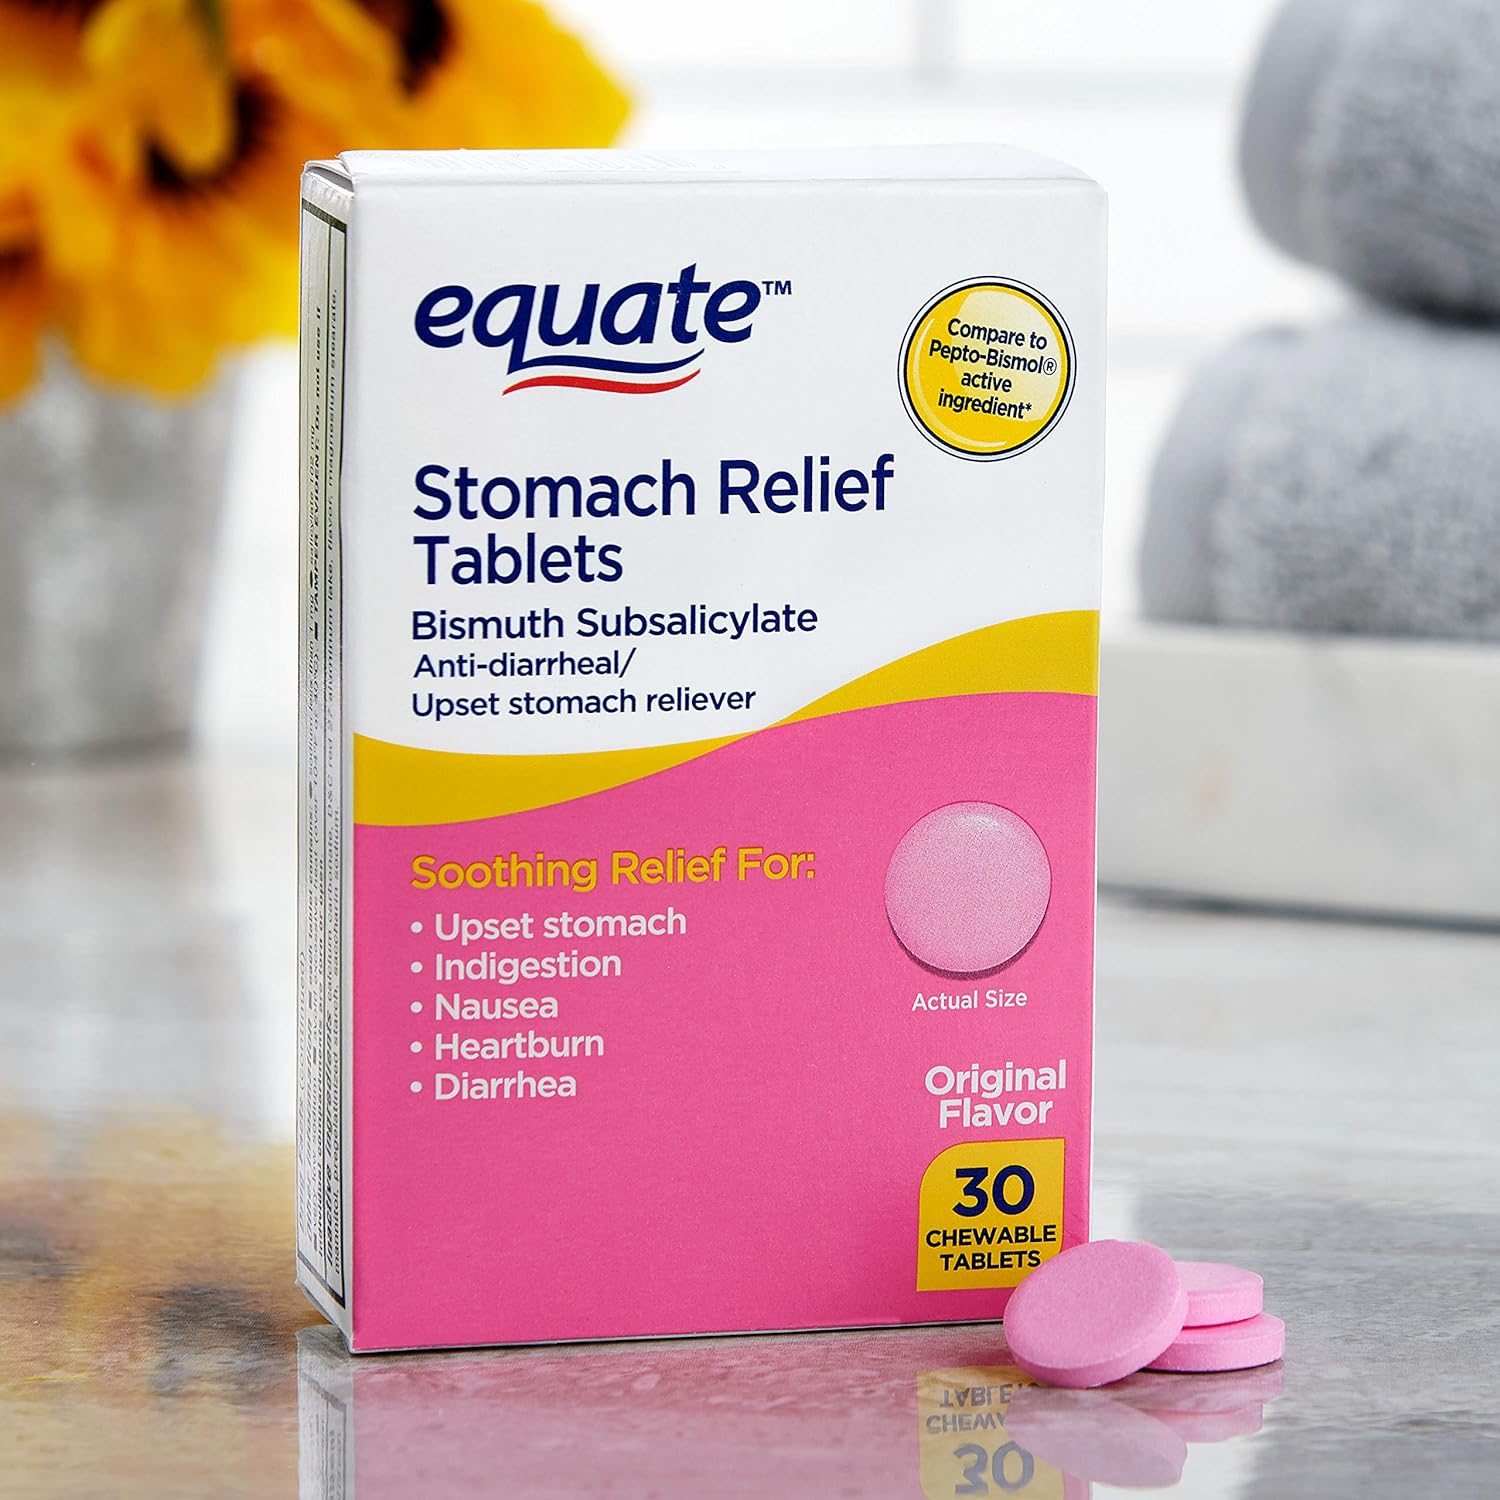 Equate - Stomach Relief, Pink Bismuth Subsalicylate, 30 Chewable Table